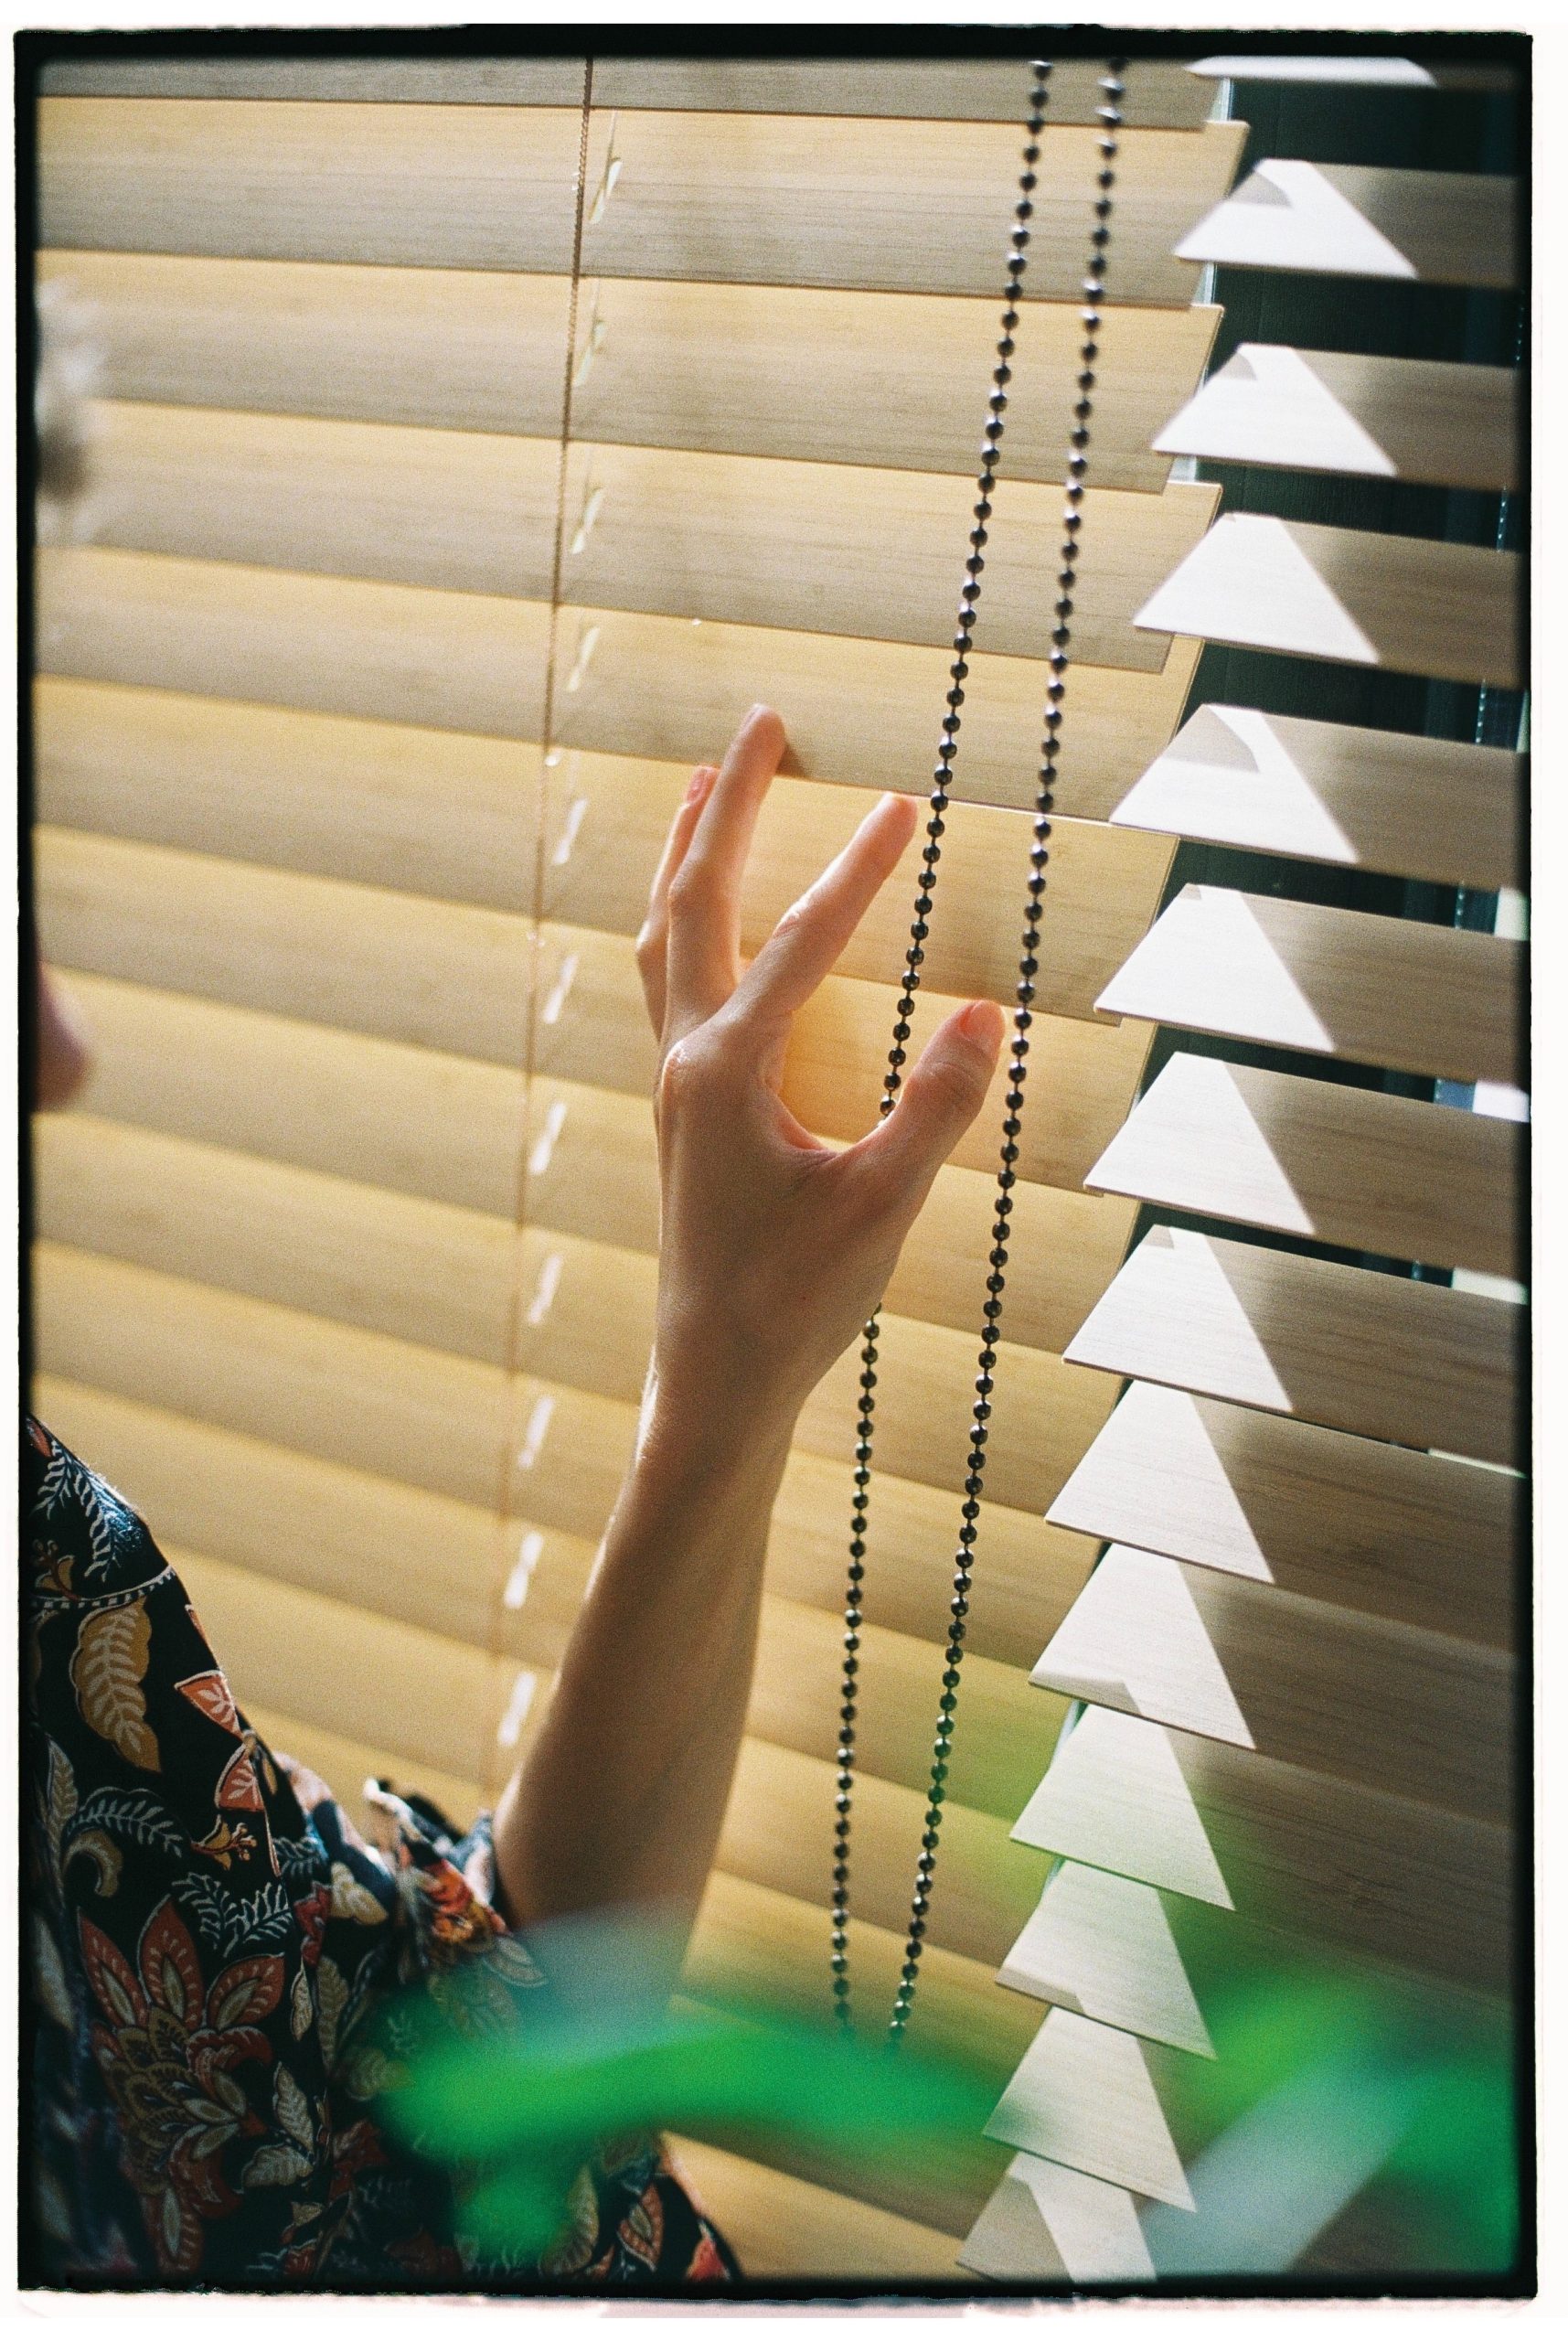 Questions to Ask When Choosing Blinds